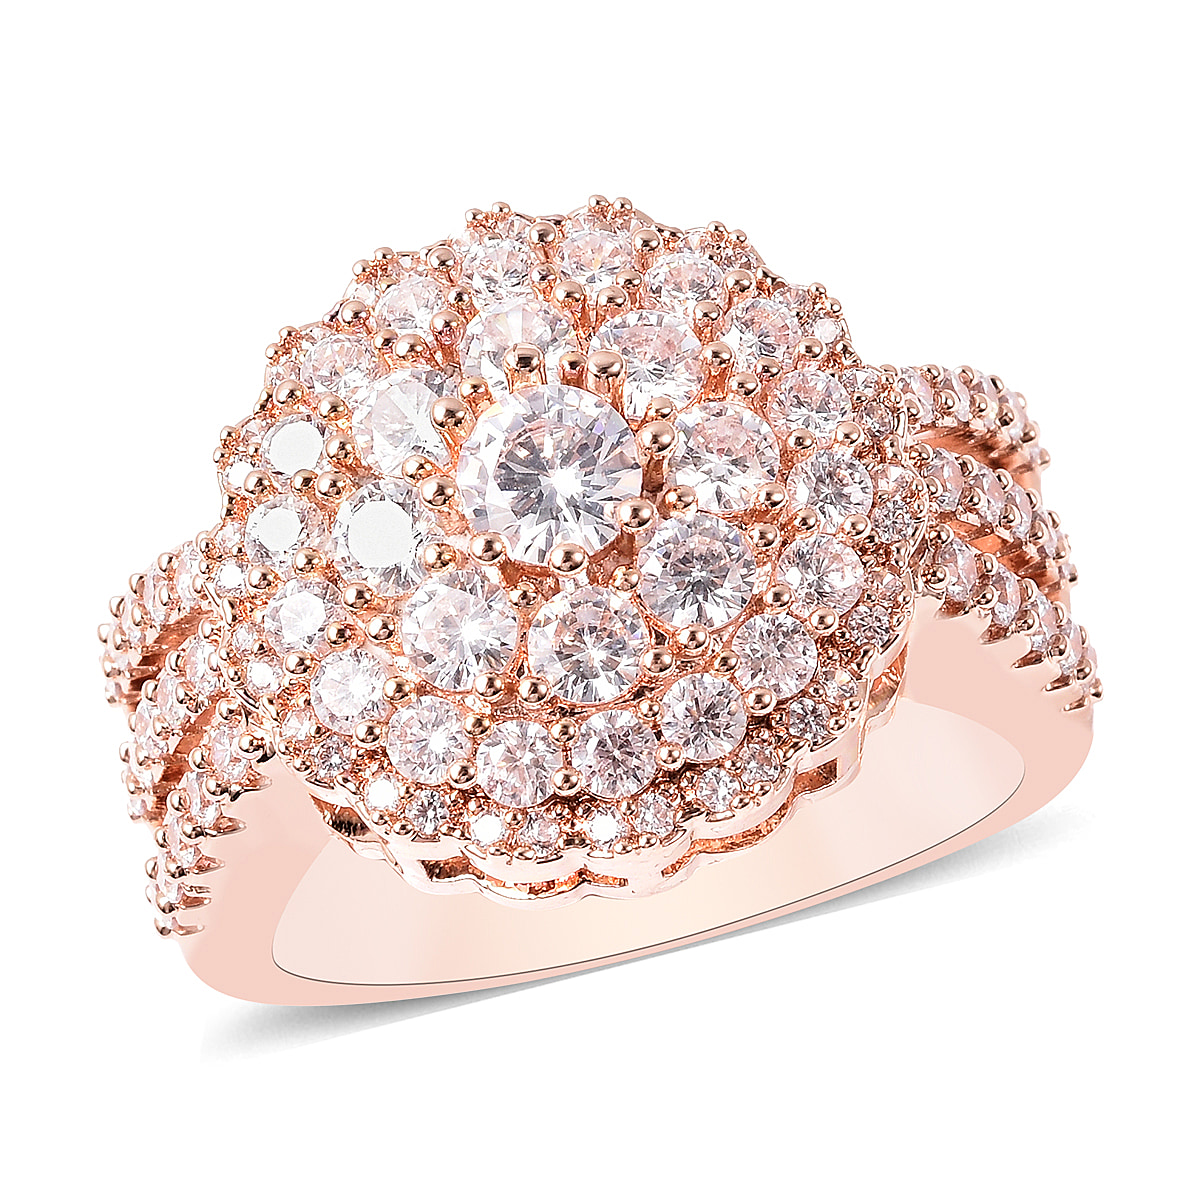 Simulated Diamond Ring in Rose Gold Tone 6021679